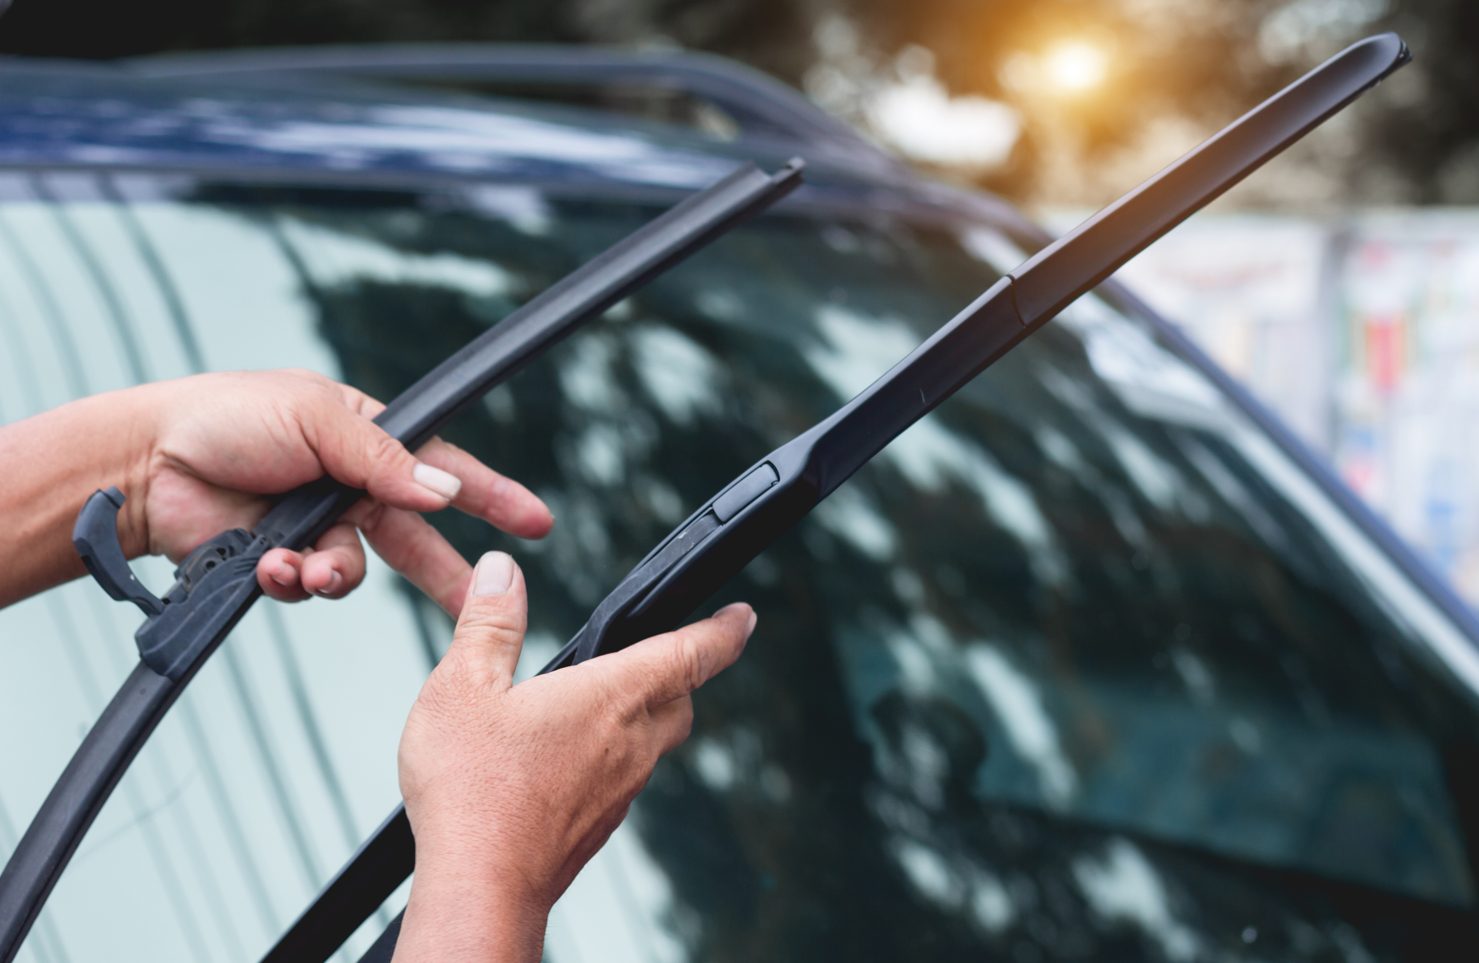 Find Wiper Blade Sizes for your car